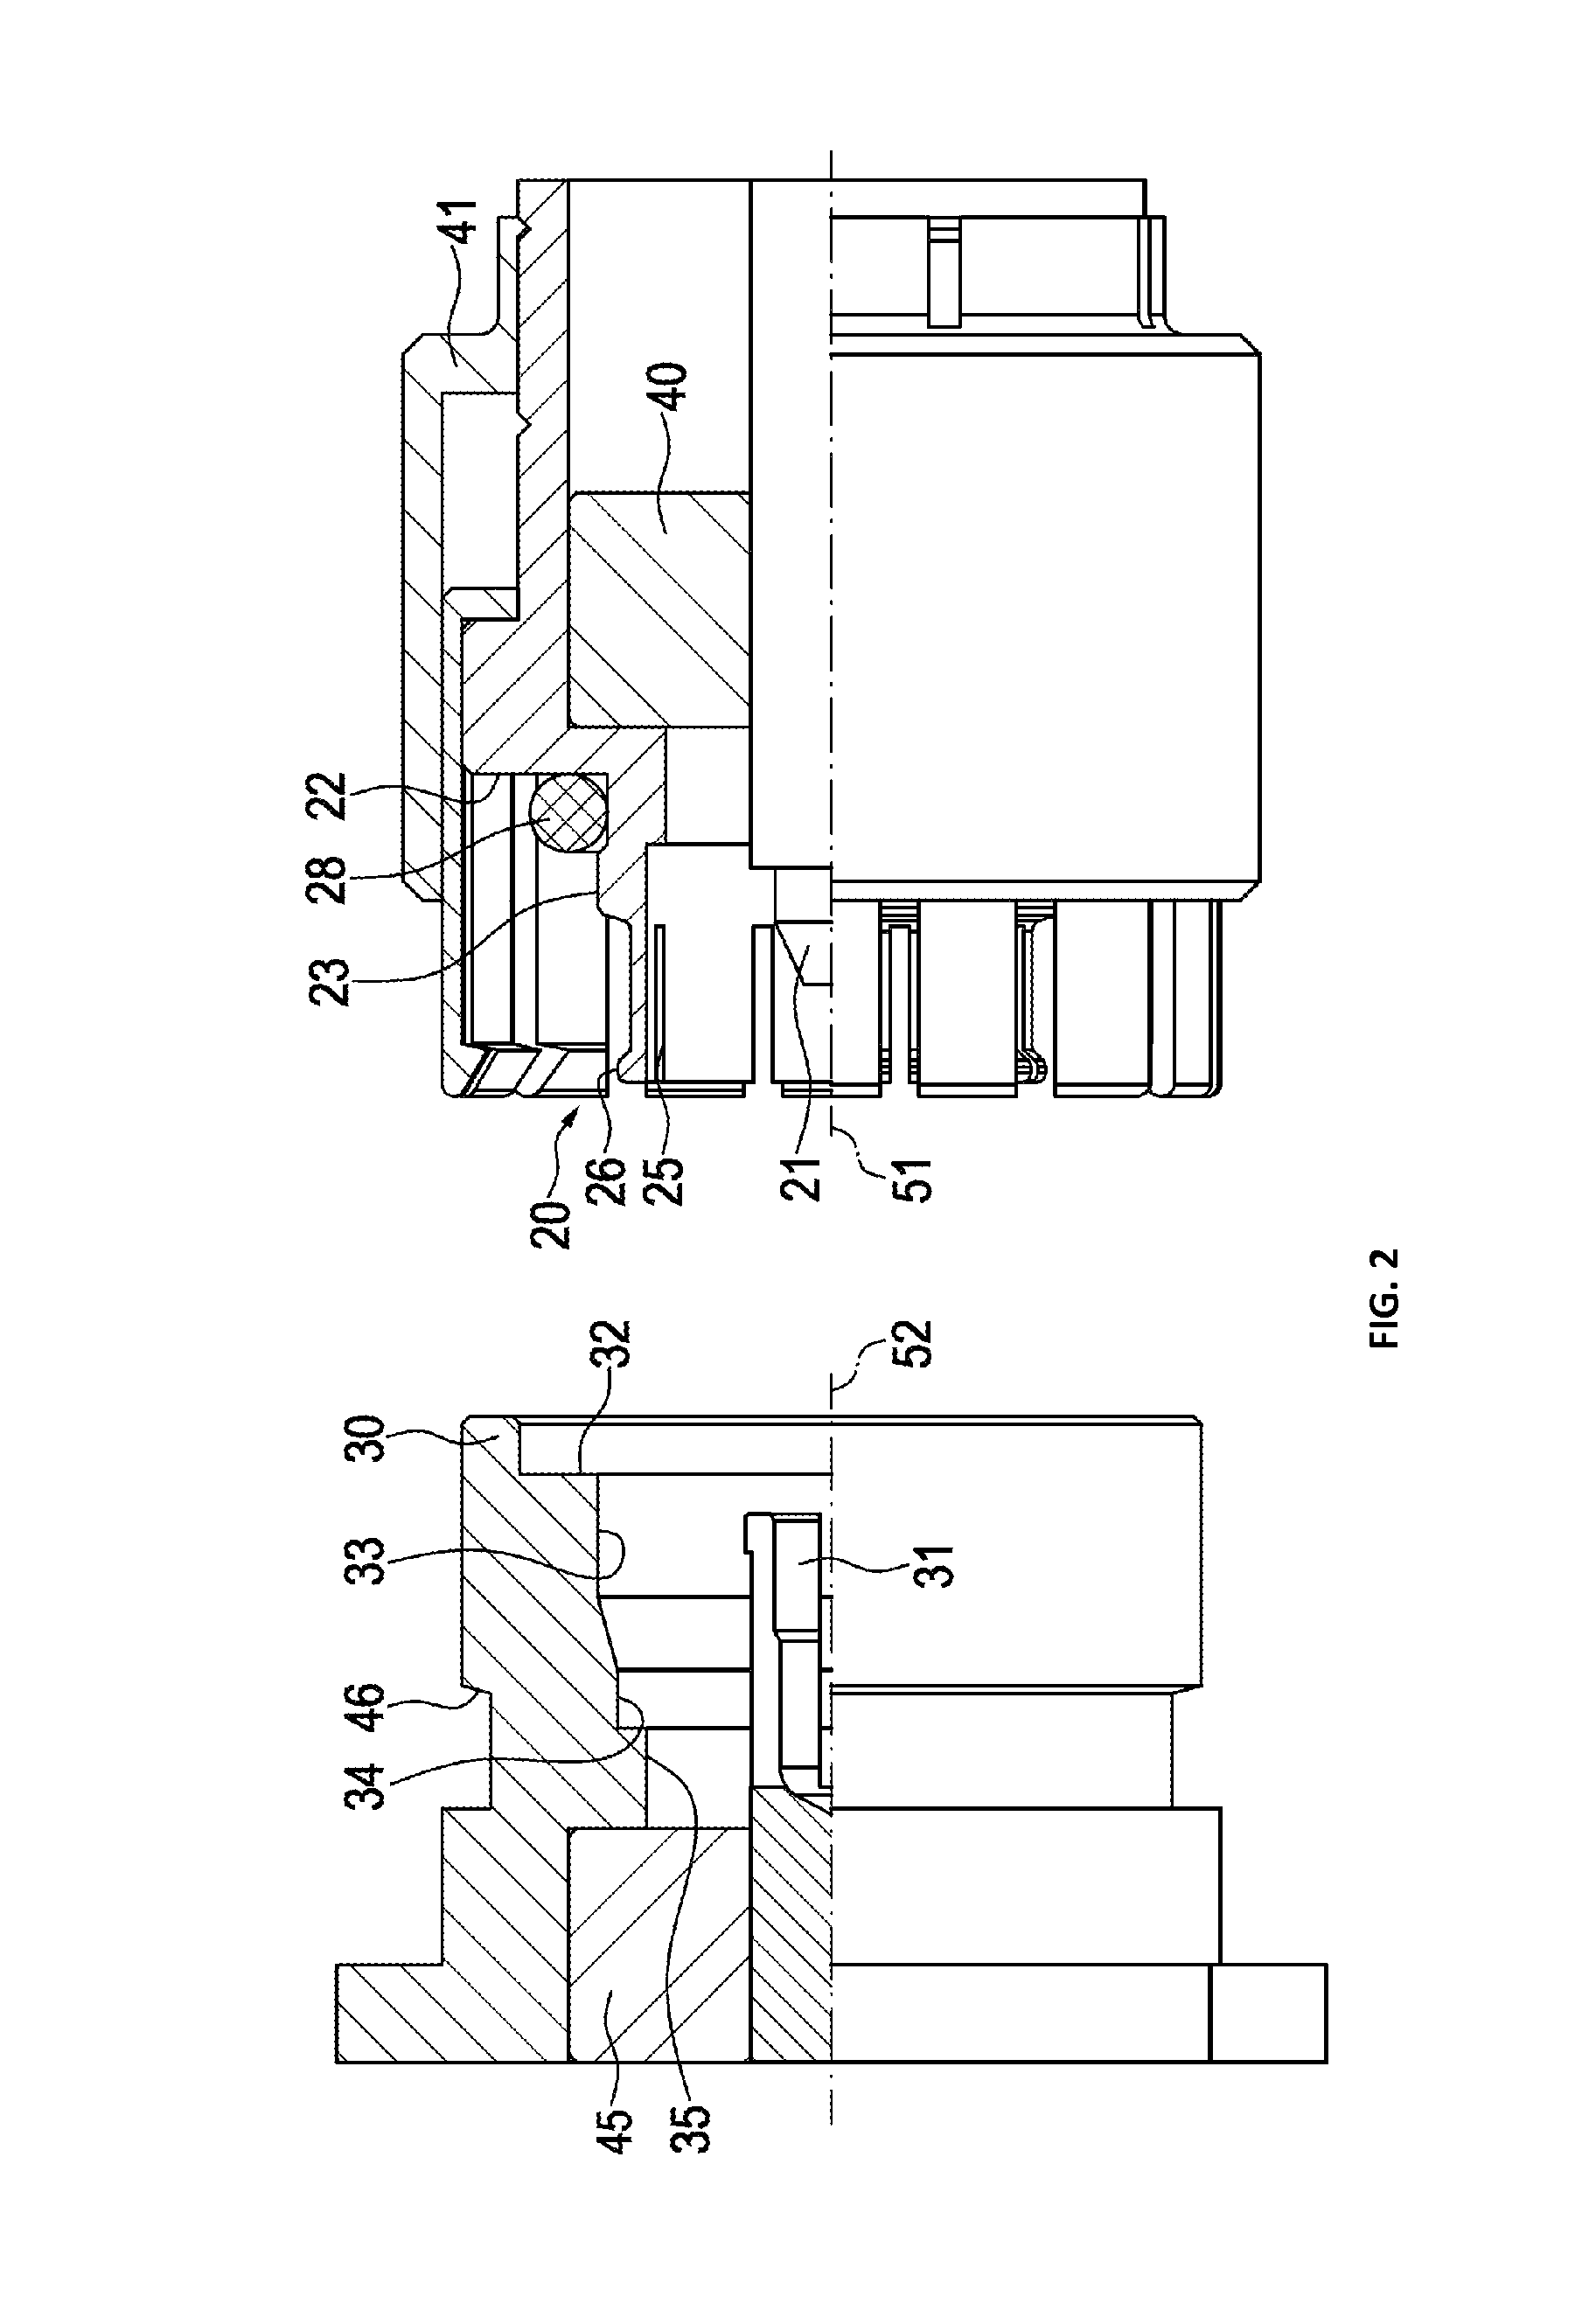 Coaxial, plug and socket connectors with precision centering means